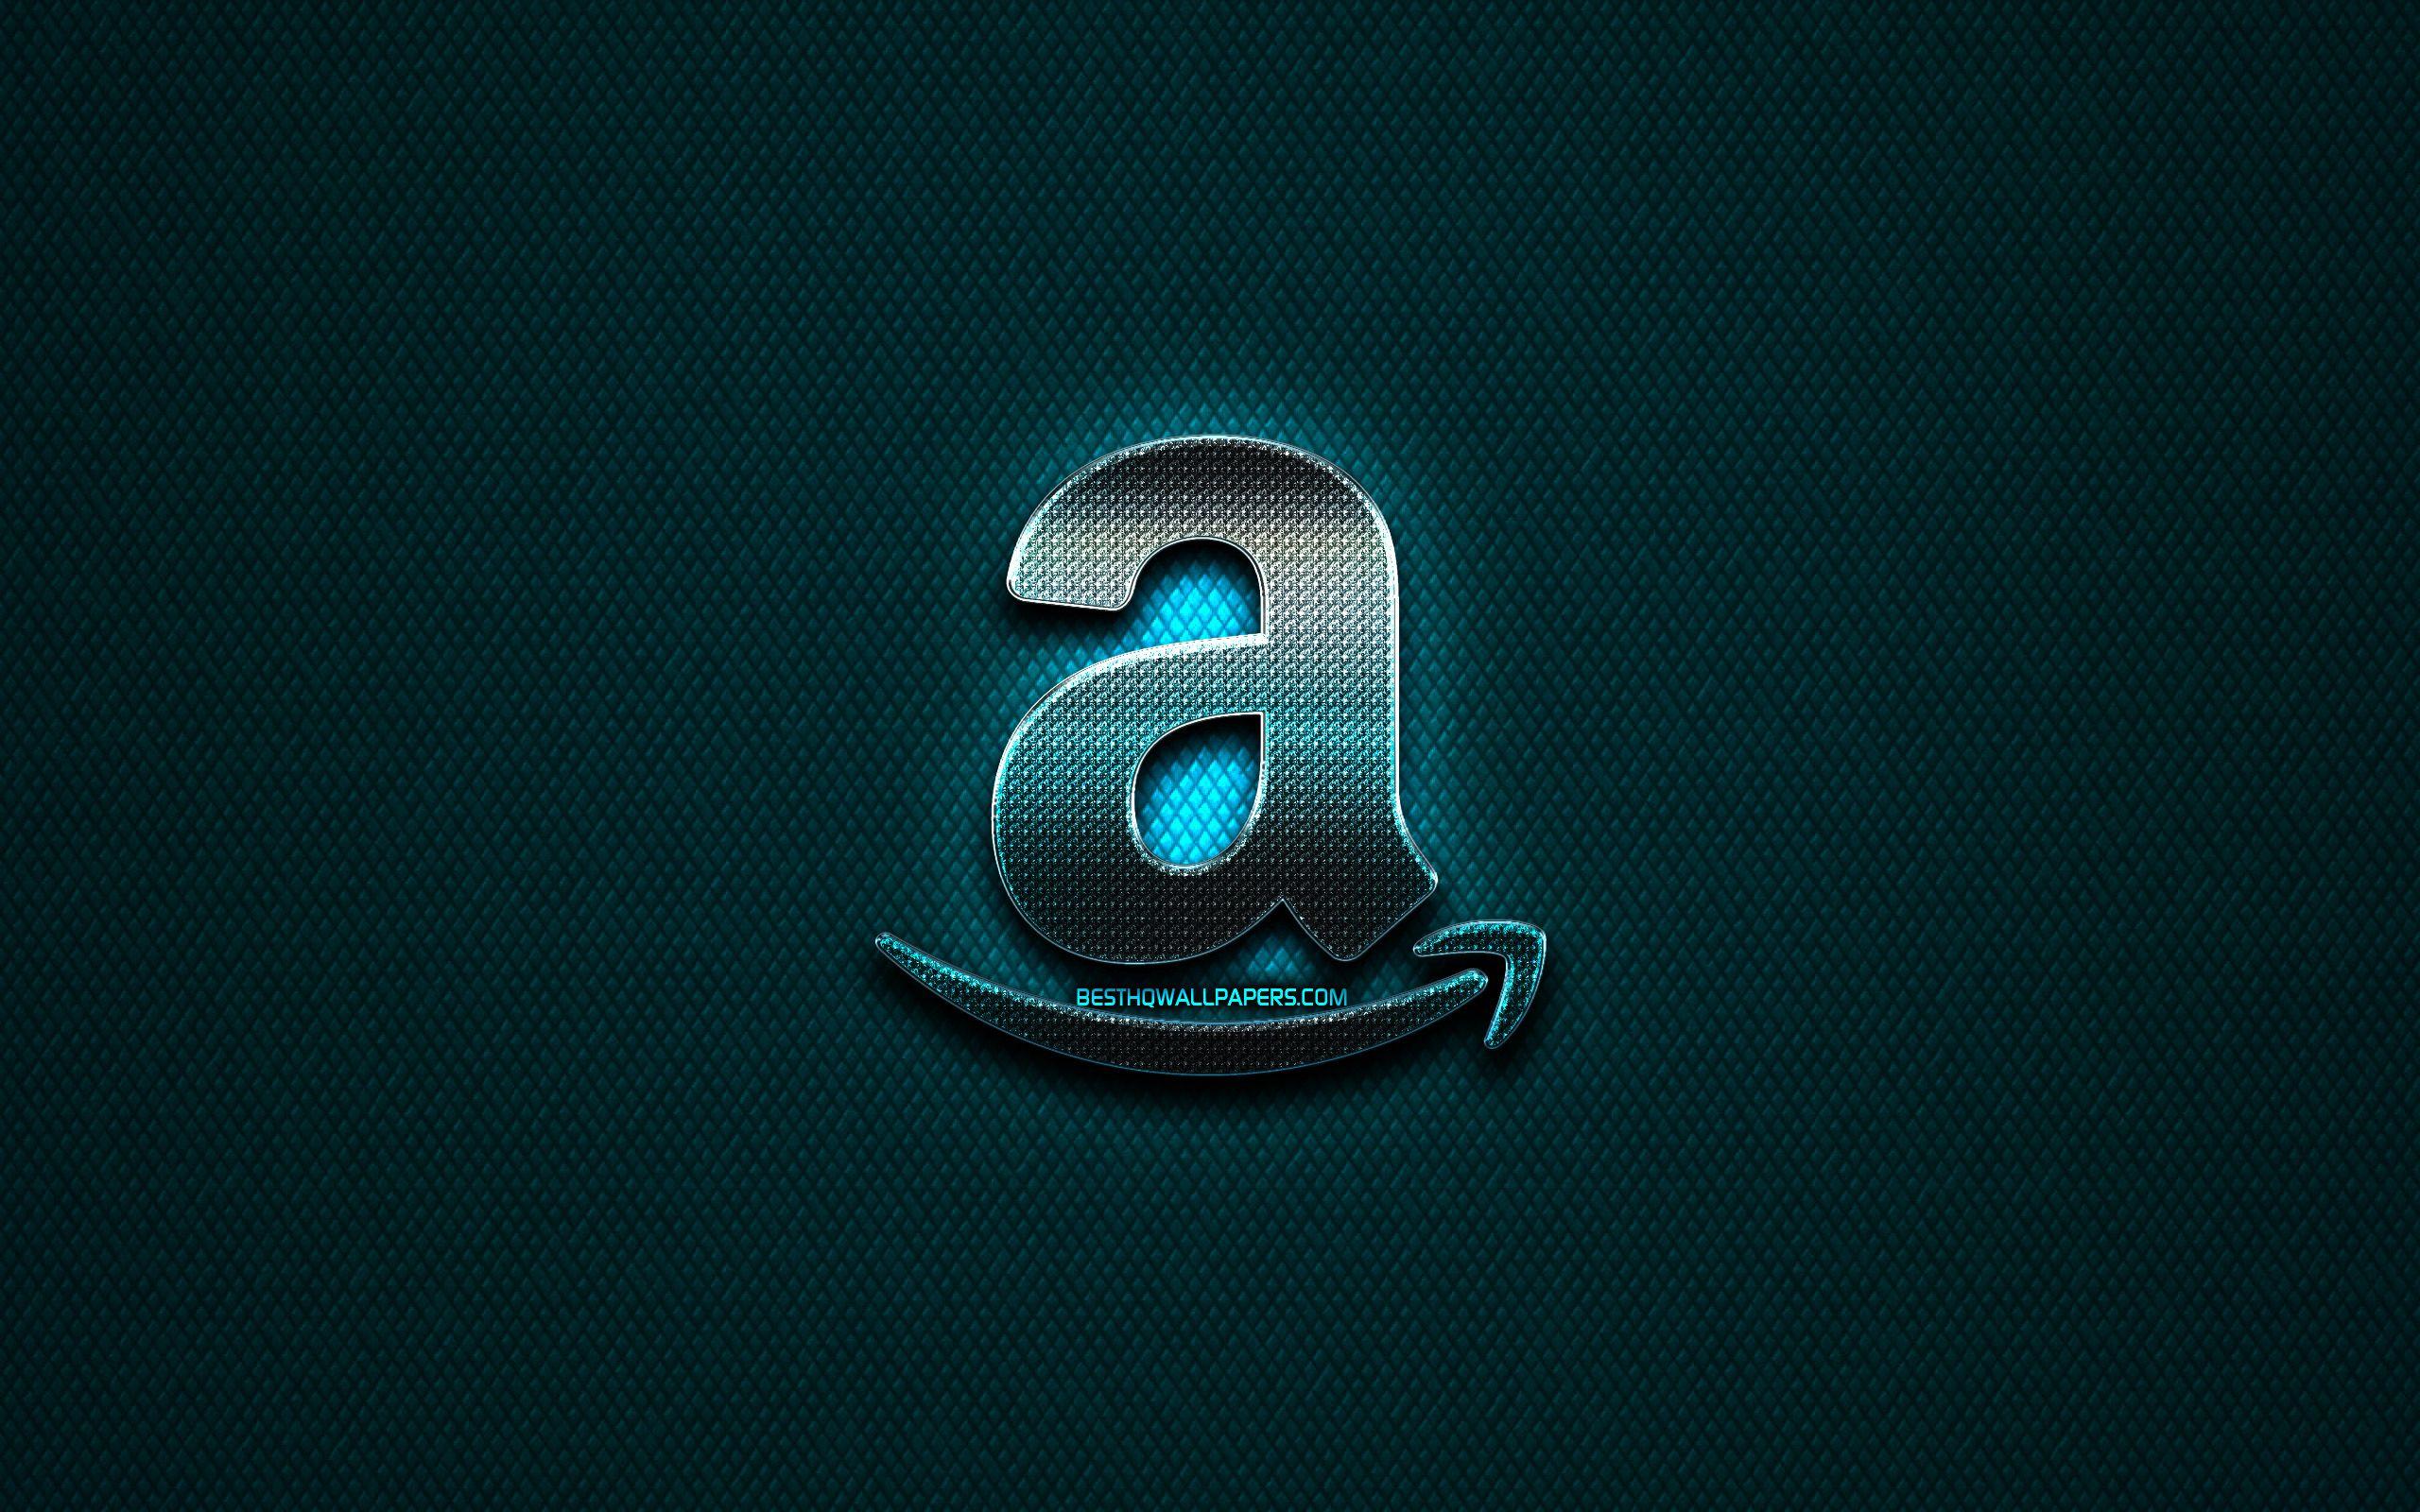 Amazon Logo Wallpapers Wallpaper Cave | vlr.eng.br